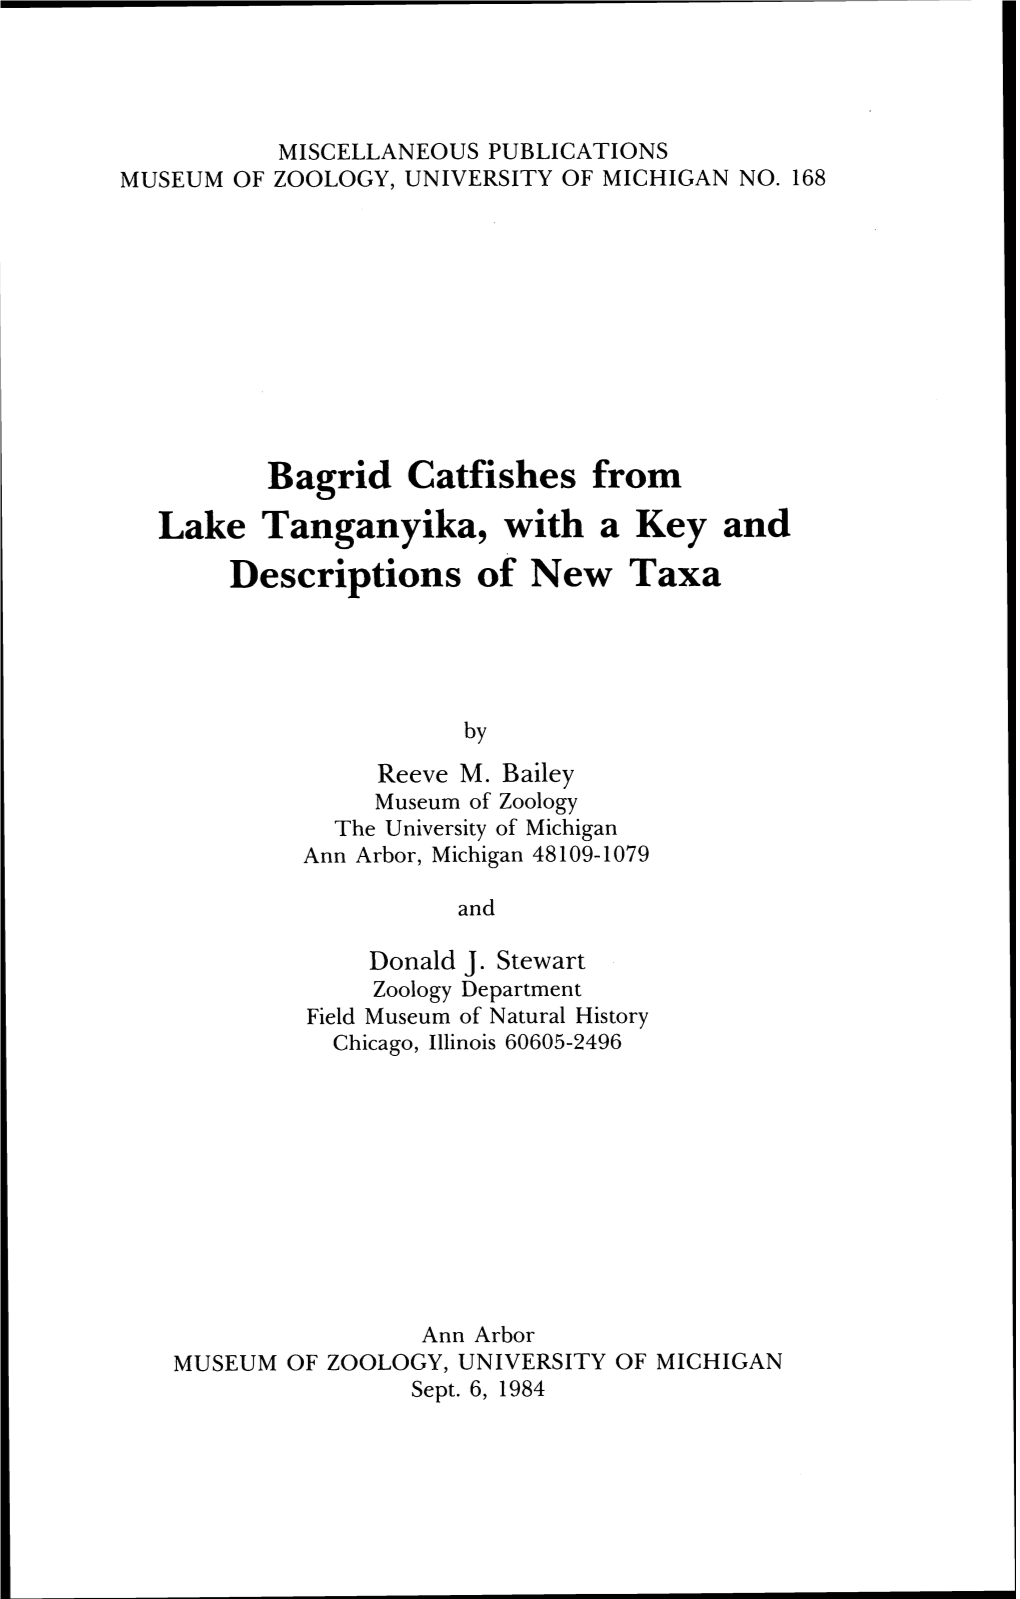 Bagrid Catfishes from Lake Tanganyika, with a Key and Descriptions of New Taxa